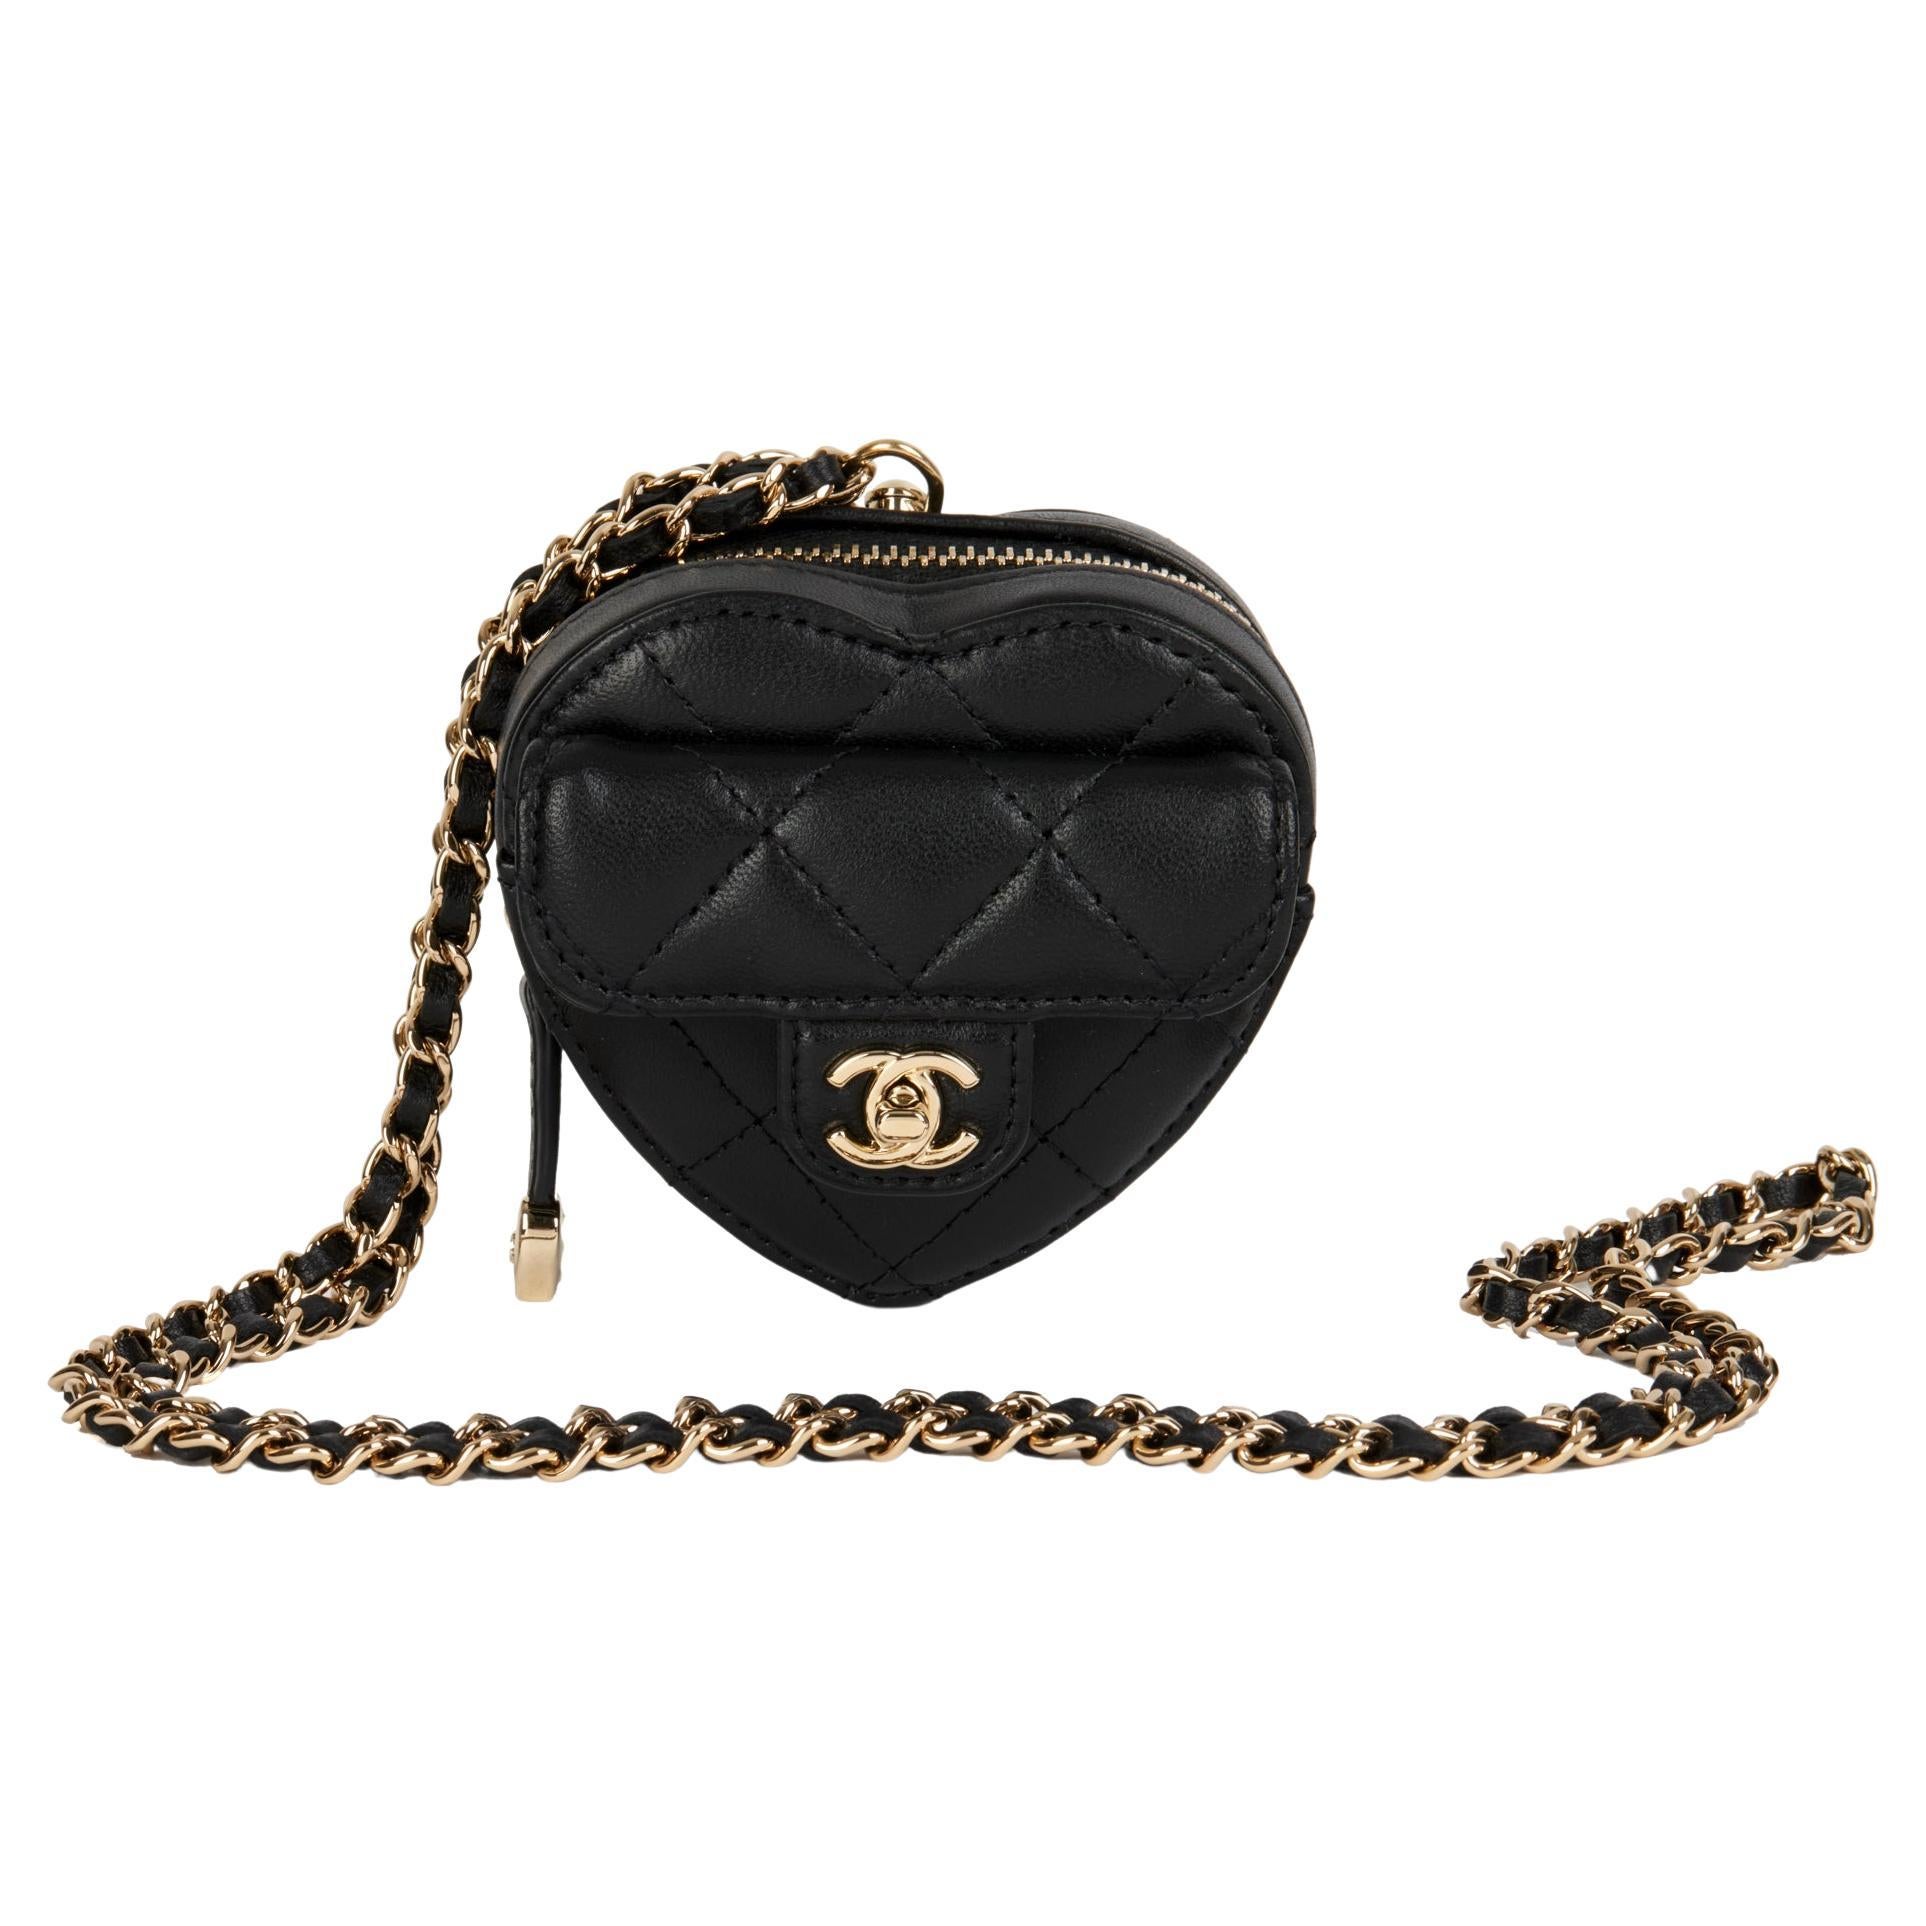 Where can I find a Chanel bag outlet store in the USA? - Quora